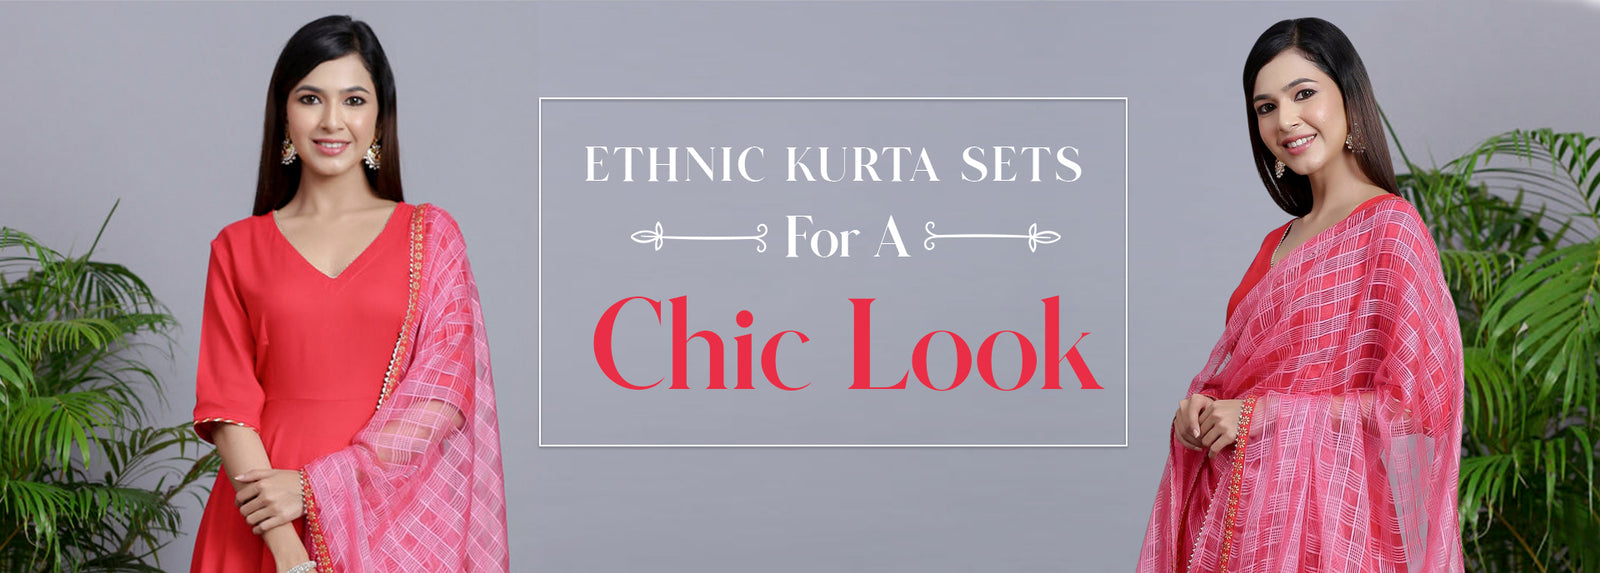 Get Festive-Ready with Our Ethnic Kurta Sets For a Chic Look